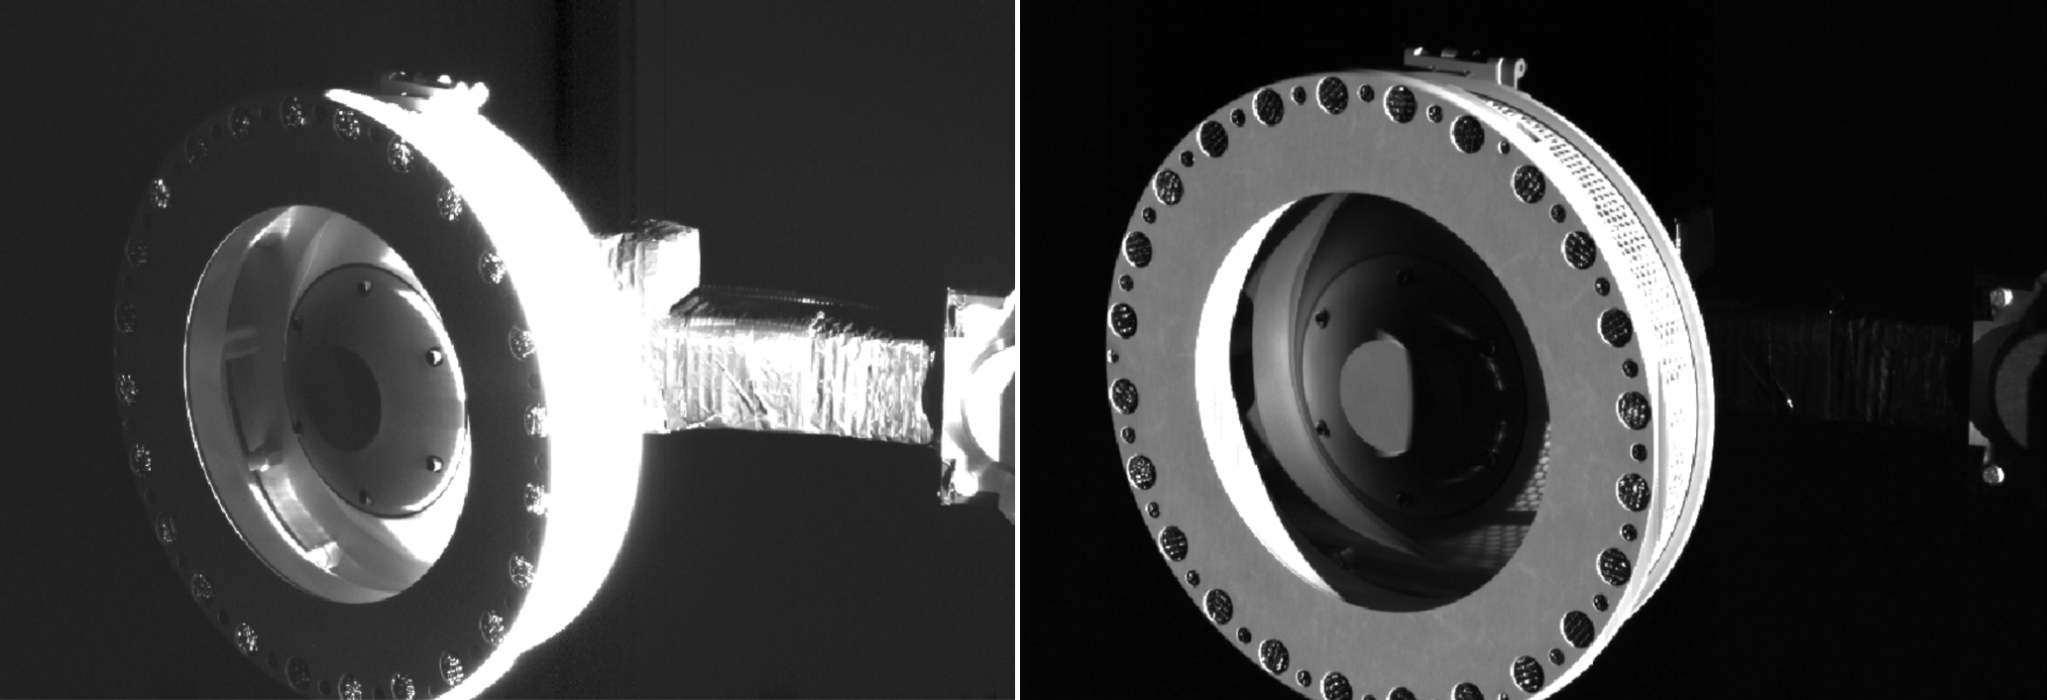 These images show the OSIRIS-REx Touch-and-Go Sample Acquisition Mechanism (TAGSAM) sampling head extended from the spacecraft